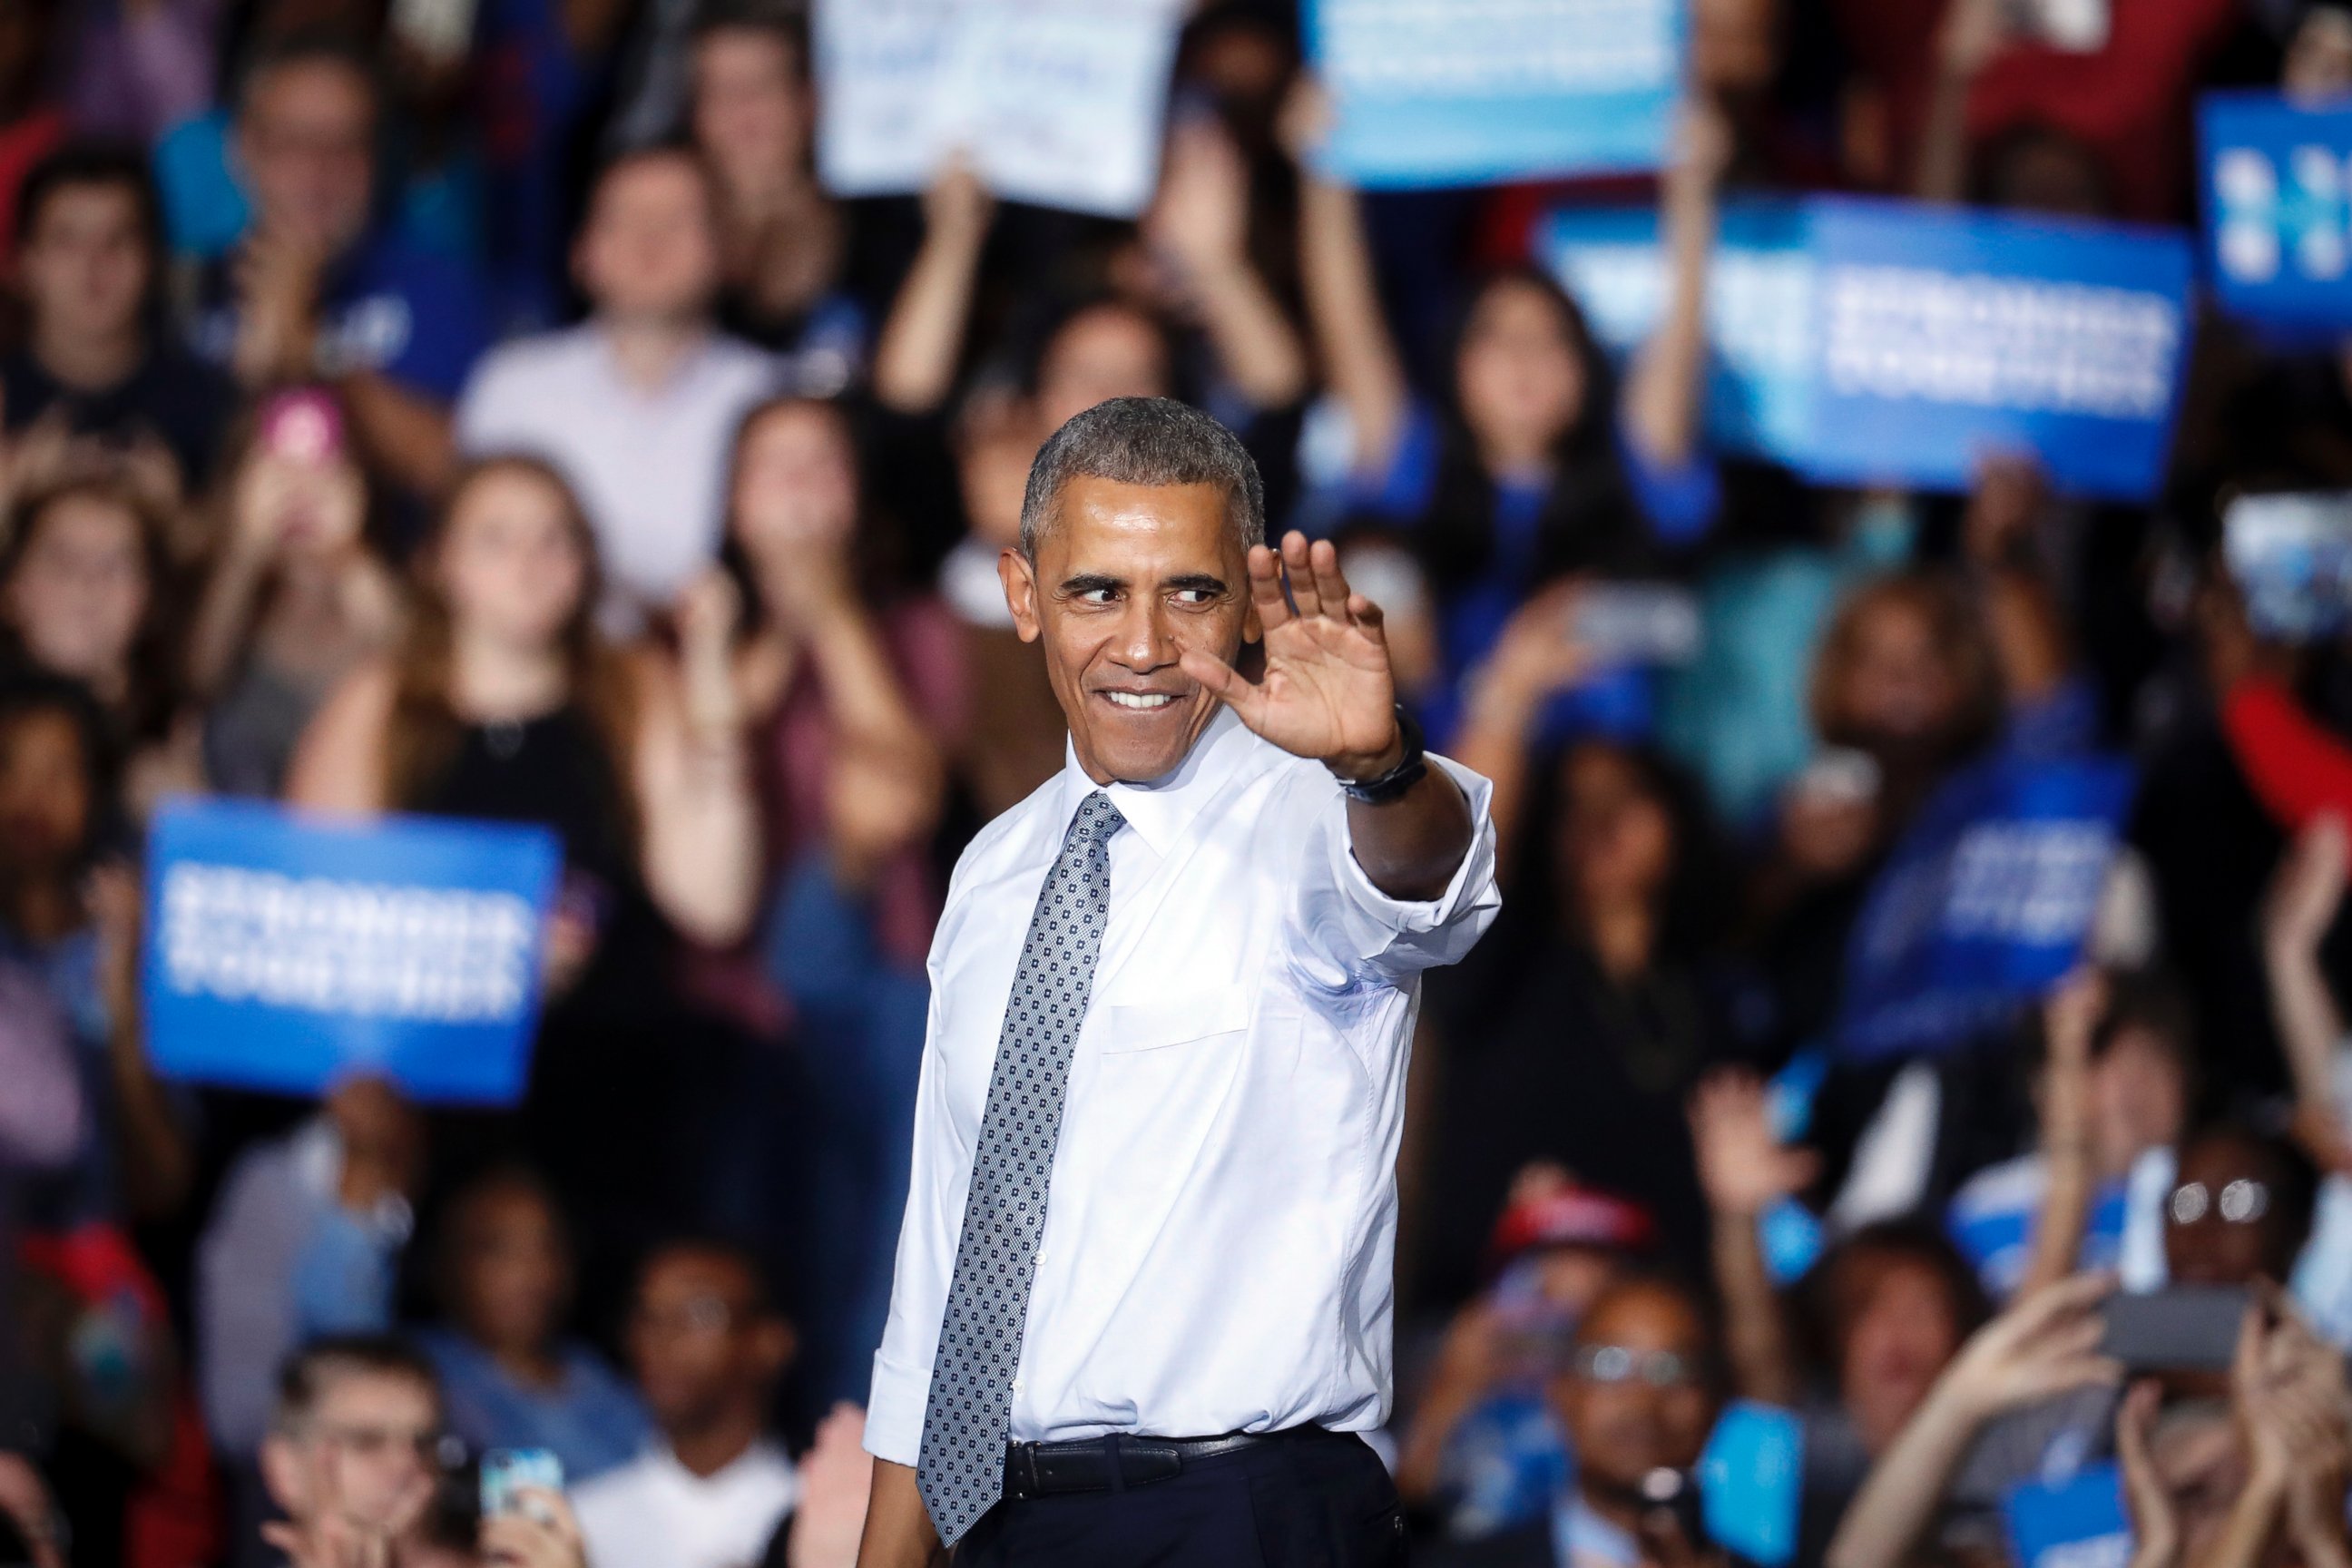 PHOTO: President Barack Obama waves to the crowd at a campaign event for Democratic presidential candidate Hillary Clinton at Capital University, Nov. 1, 2016, in Columbus, Ohio.